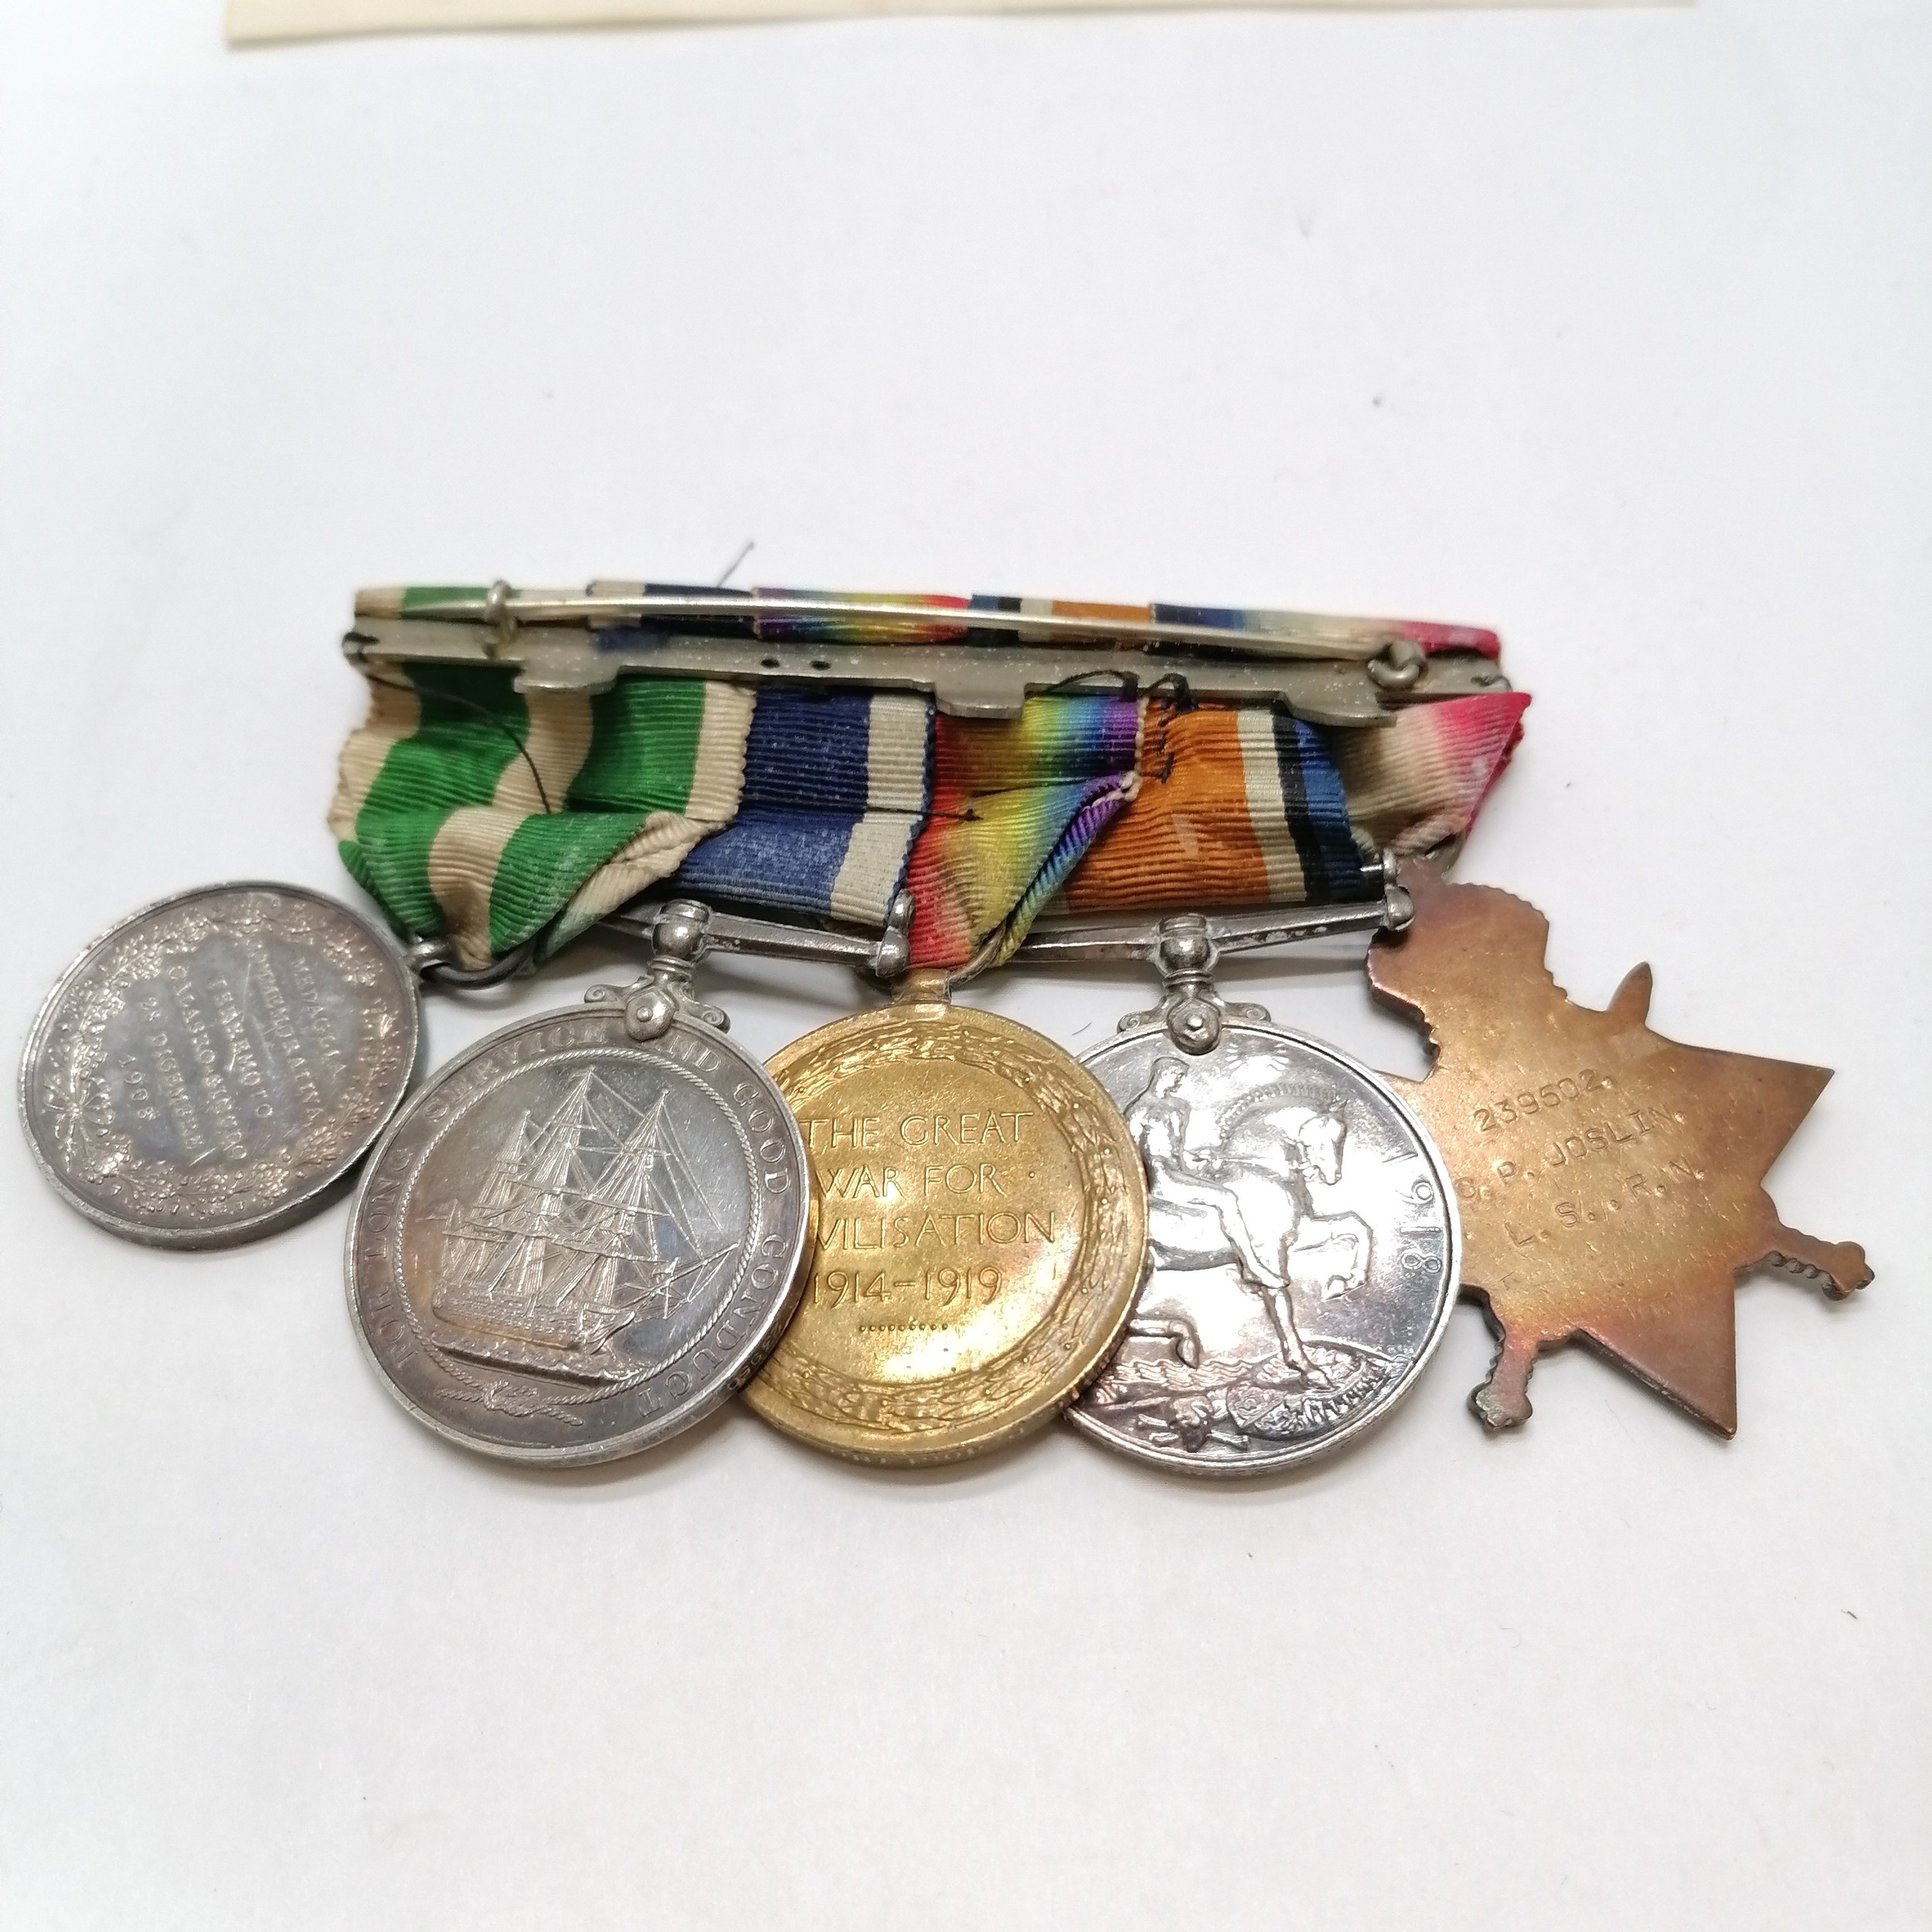 WWI group of medals for Charles Percy Josling (b.1891) - 1914-15 star, British War medal, Victory - Image 7 of 10